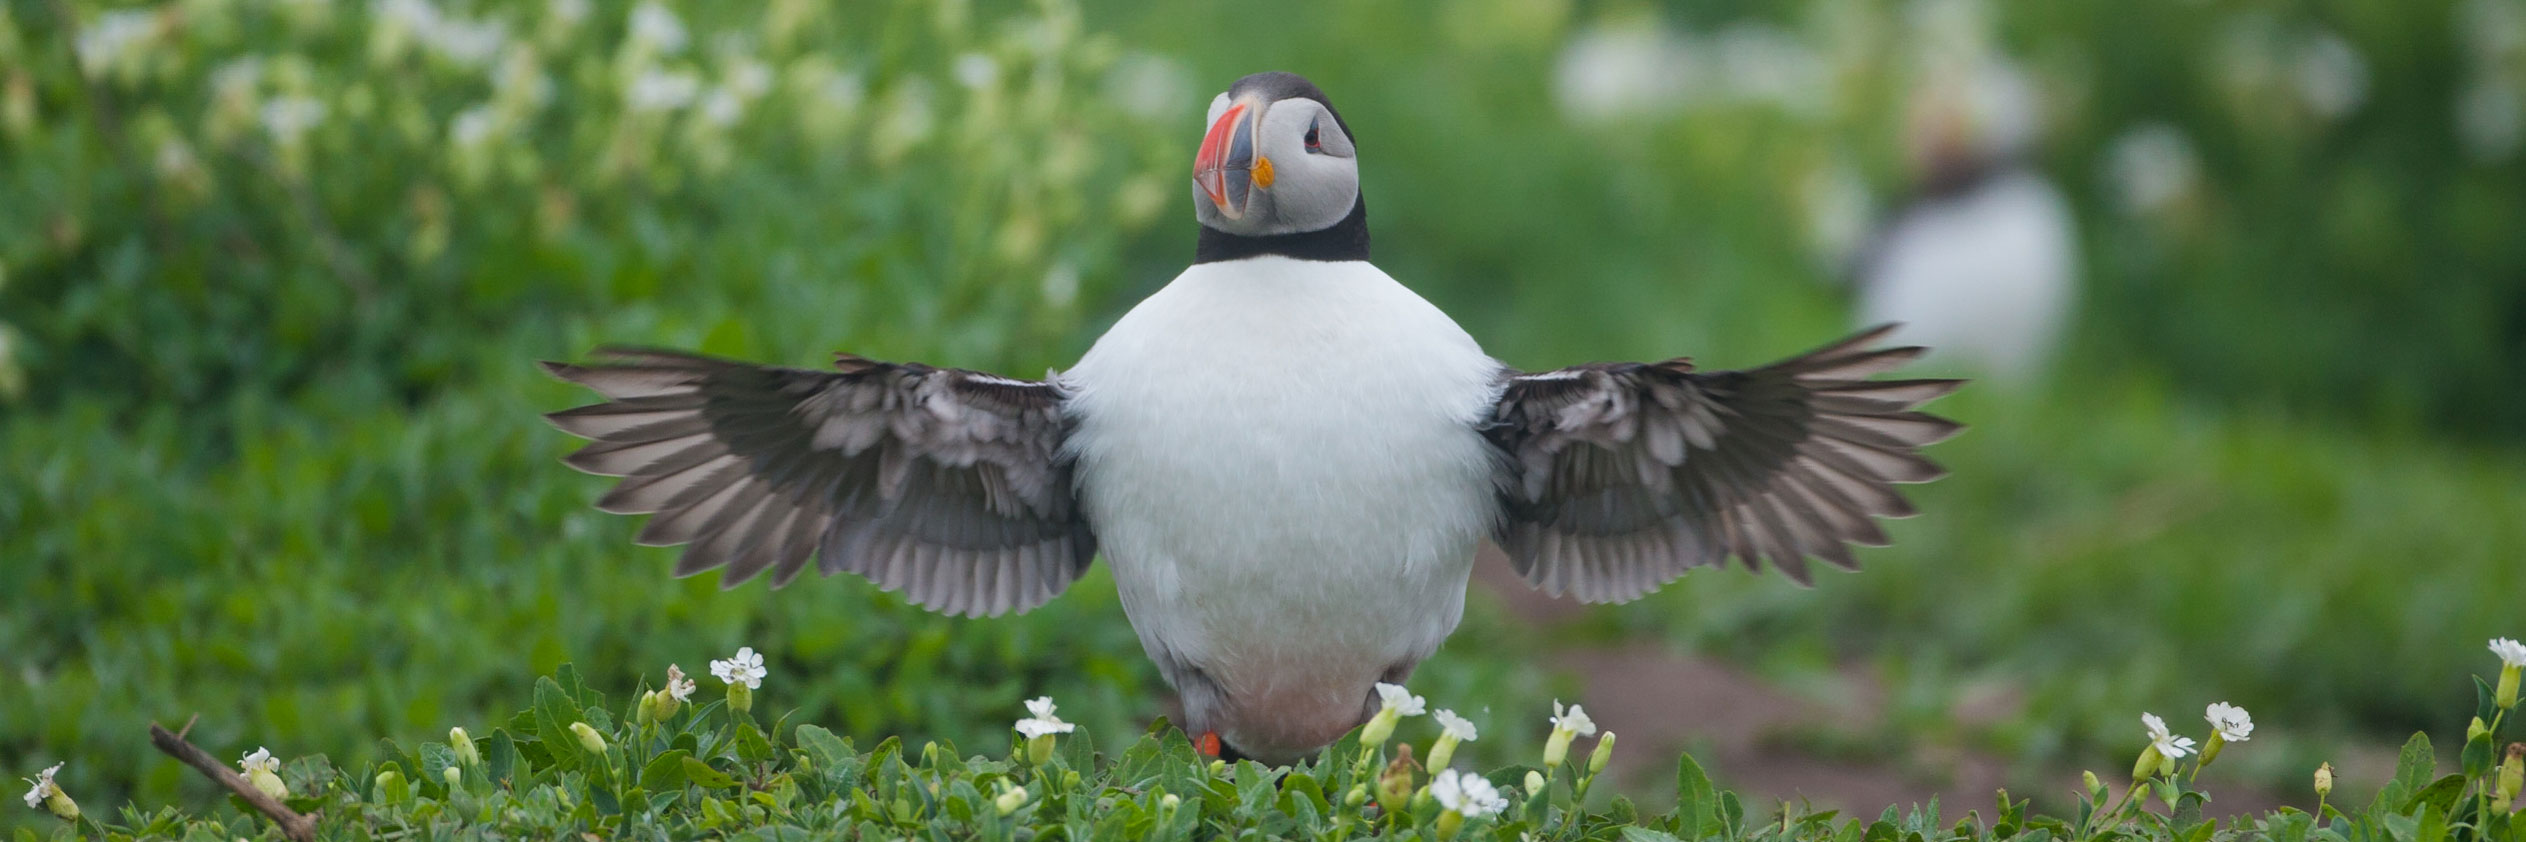 HOW AND WHERE TO SEE PUFFINS IN THE UK